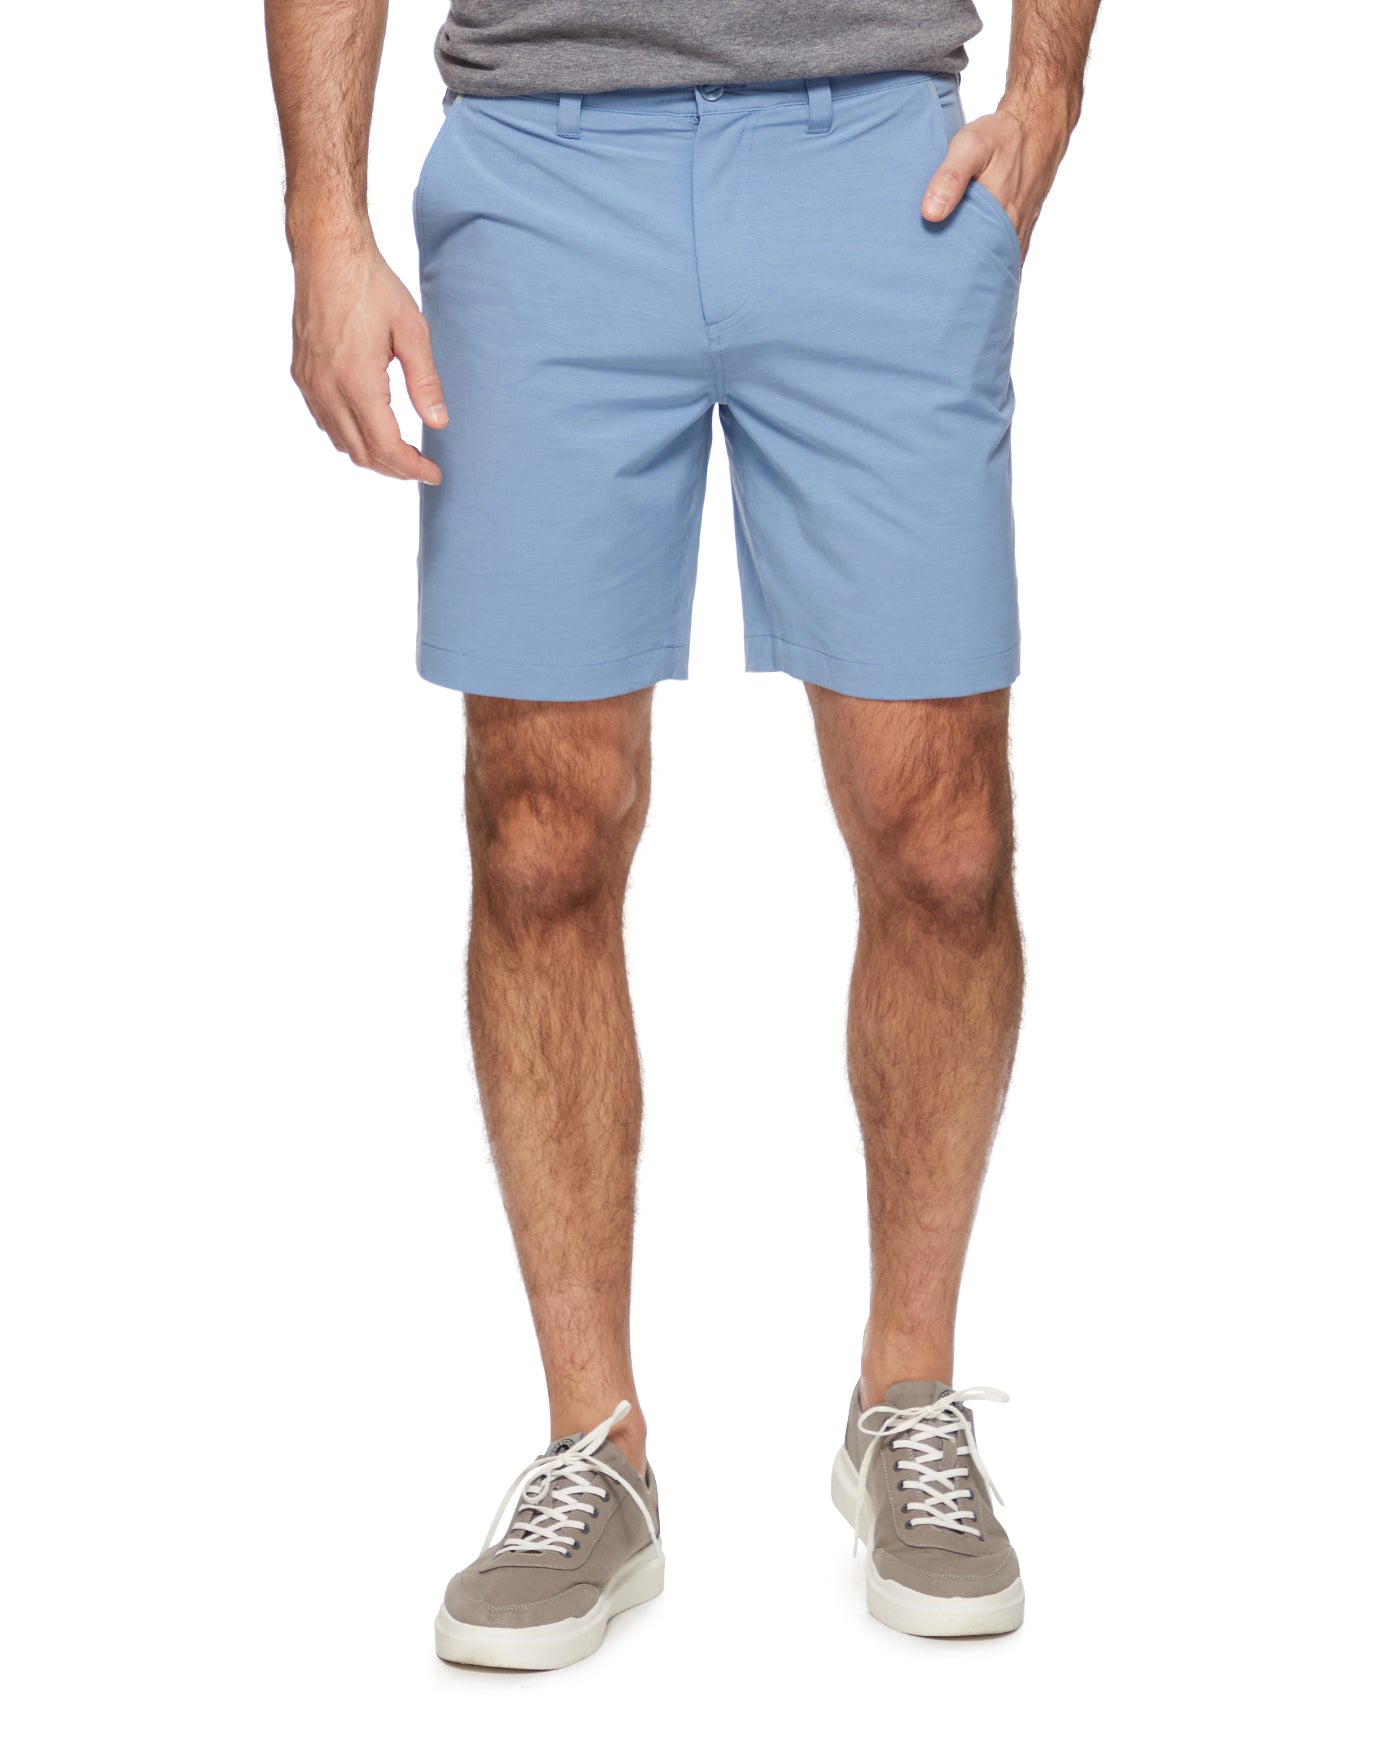 COTTON BLEND ANY-WEAR PERFORMANCE SHORT - 8" INSEAM